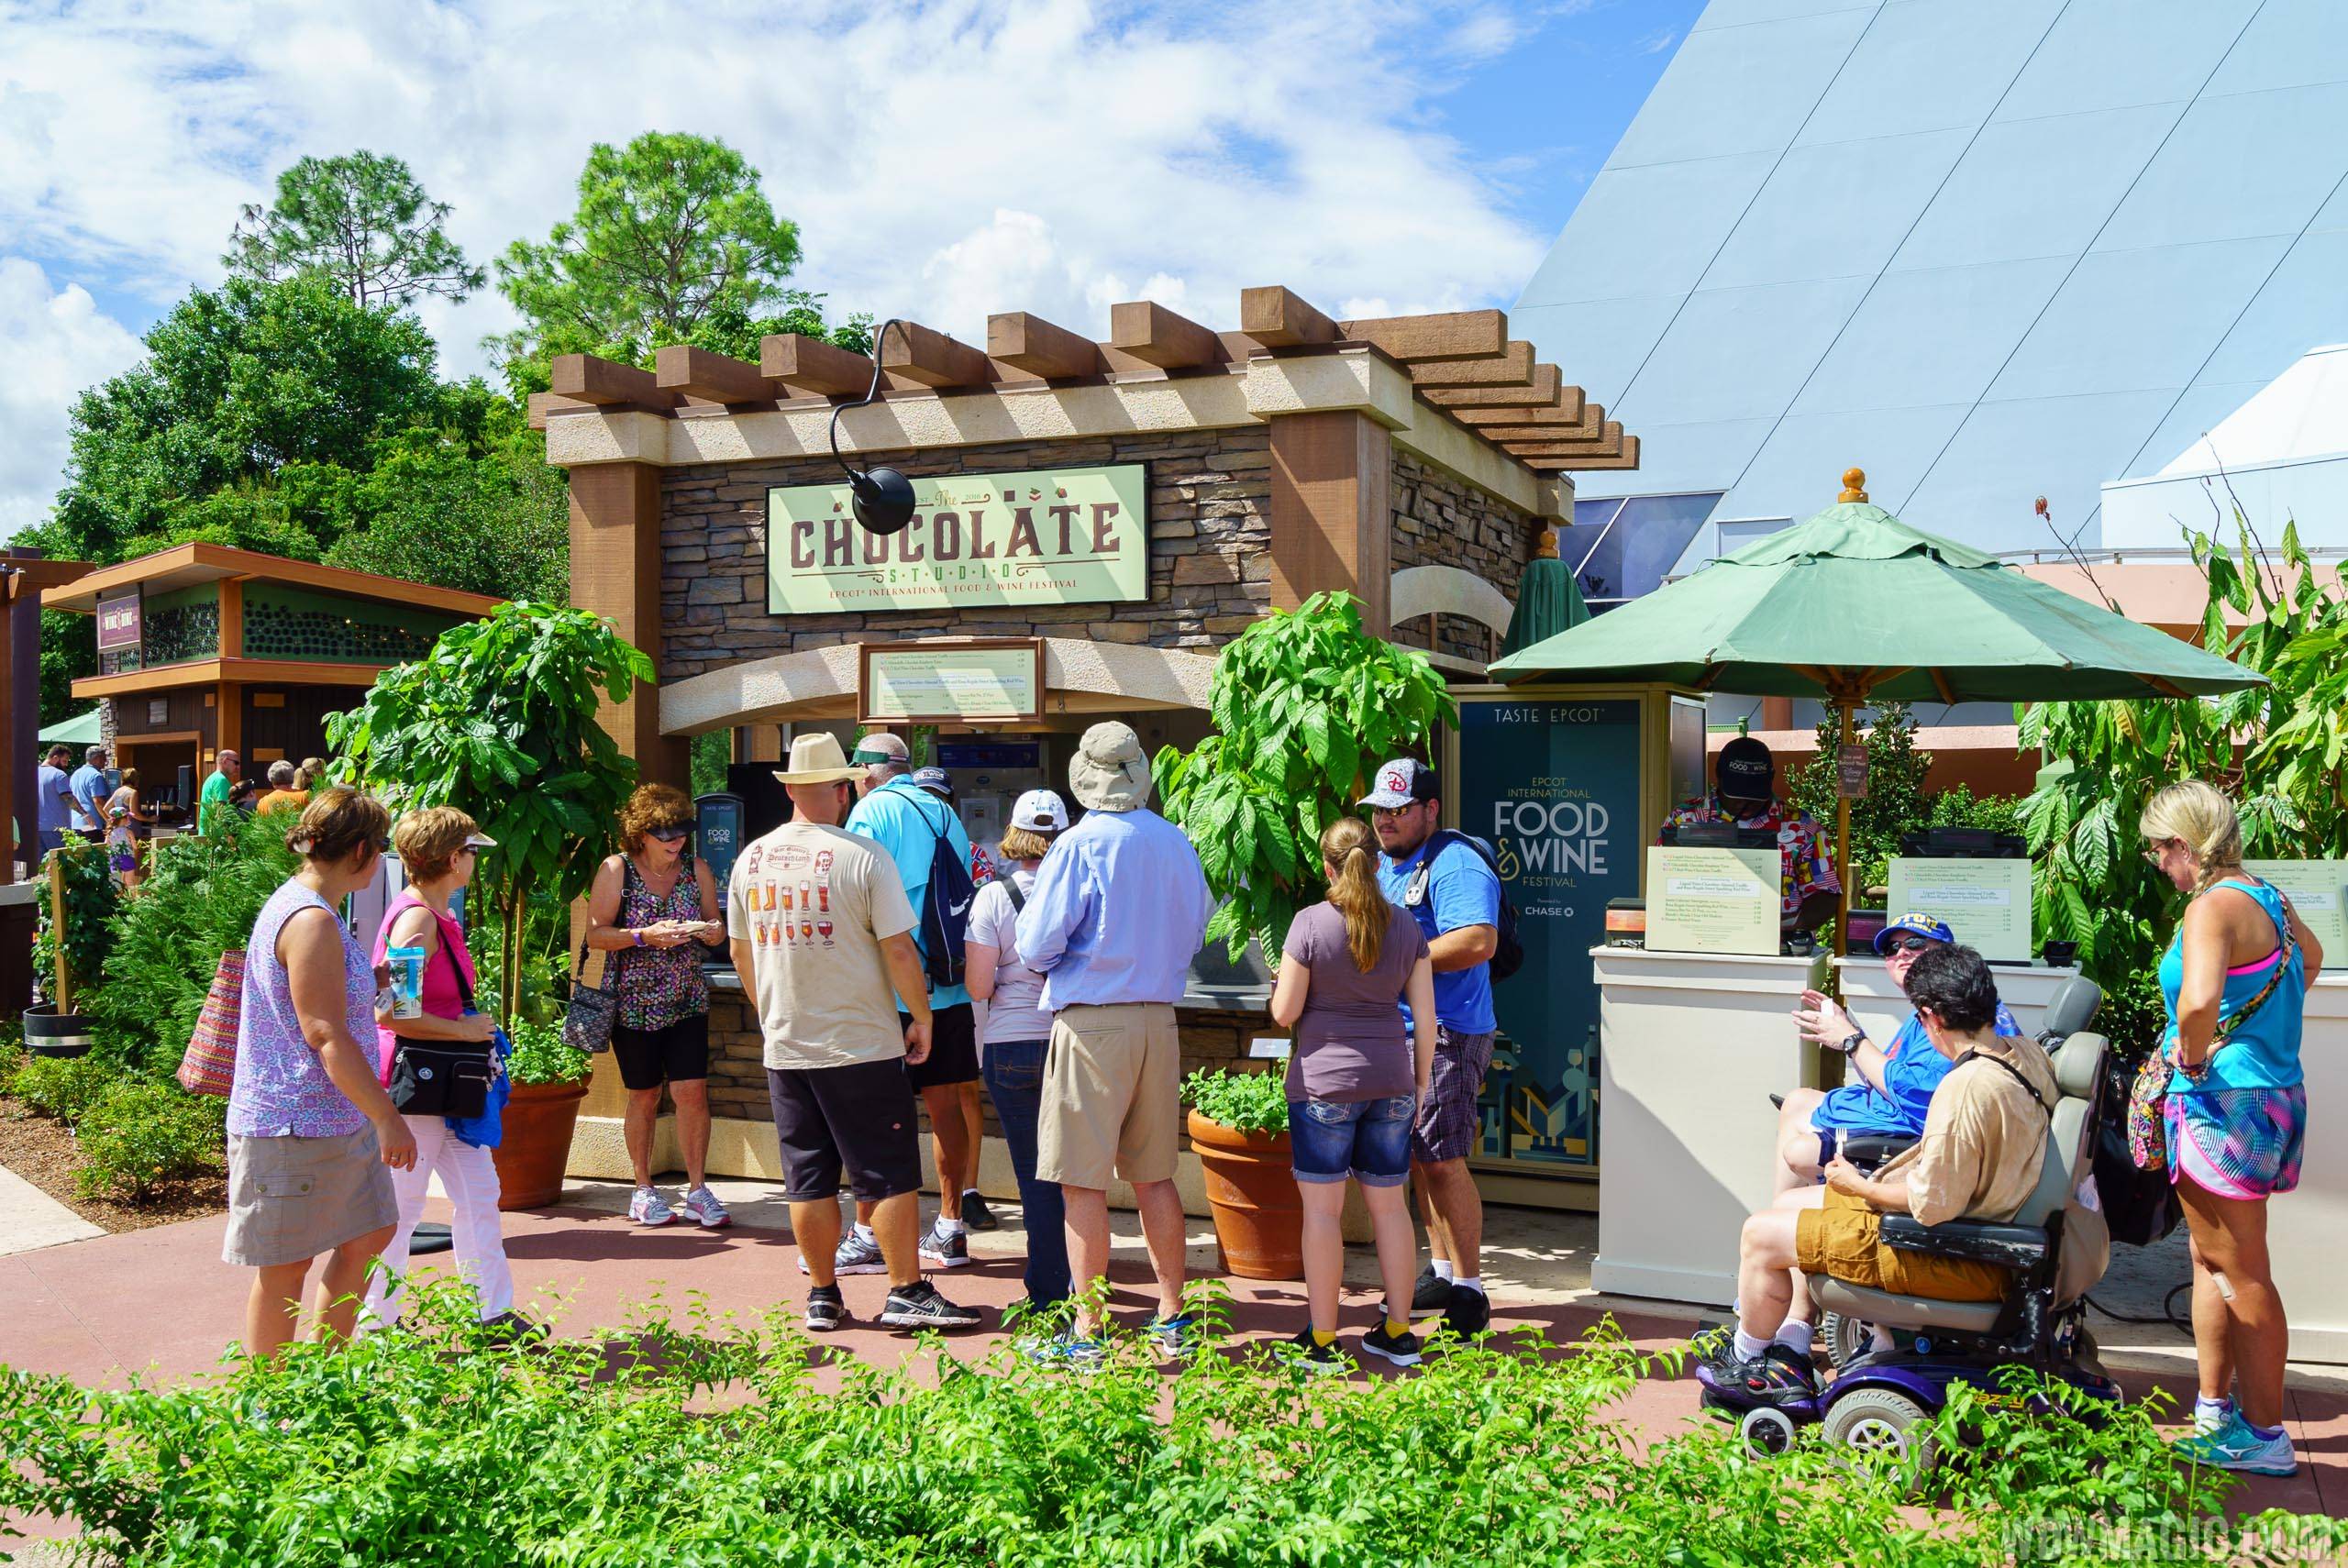 2016 Epcot Food and Wine Festival Marketplace kiosks, menus and pricing